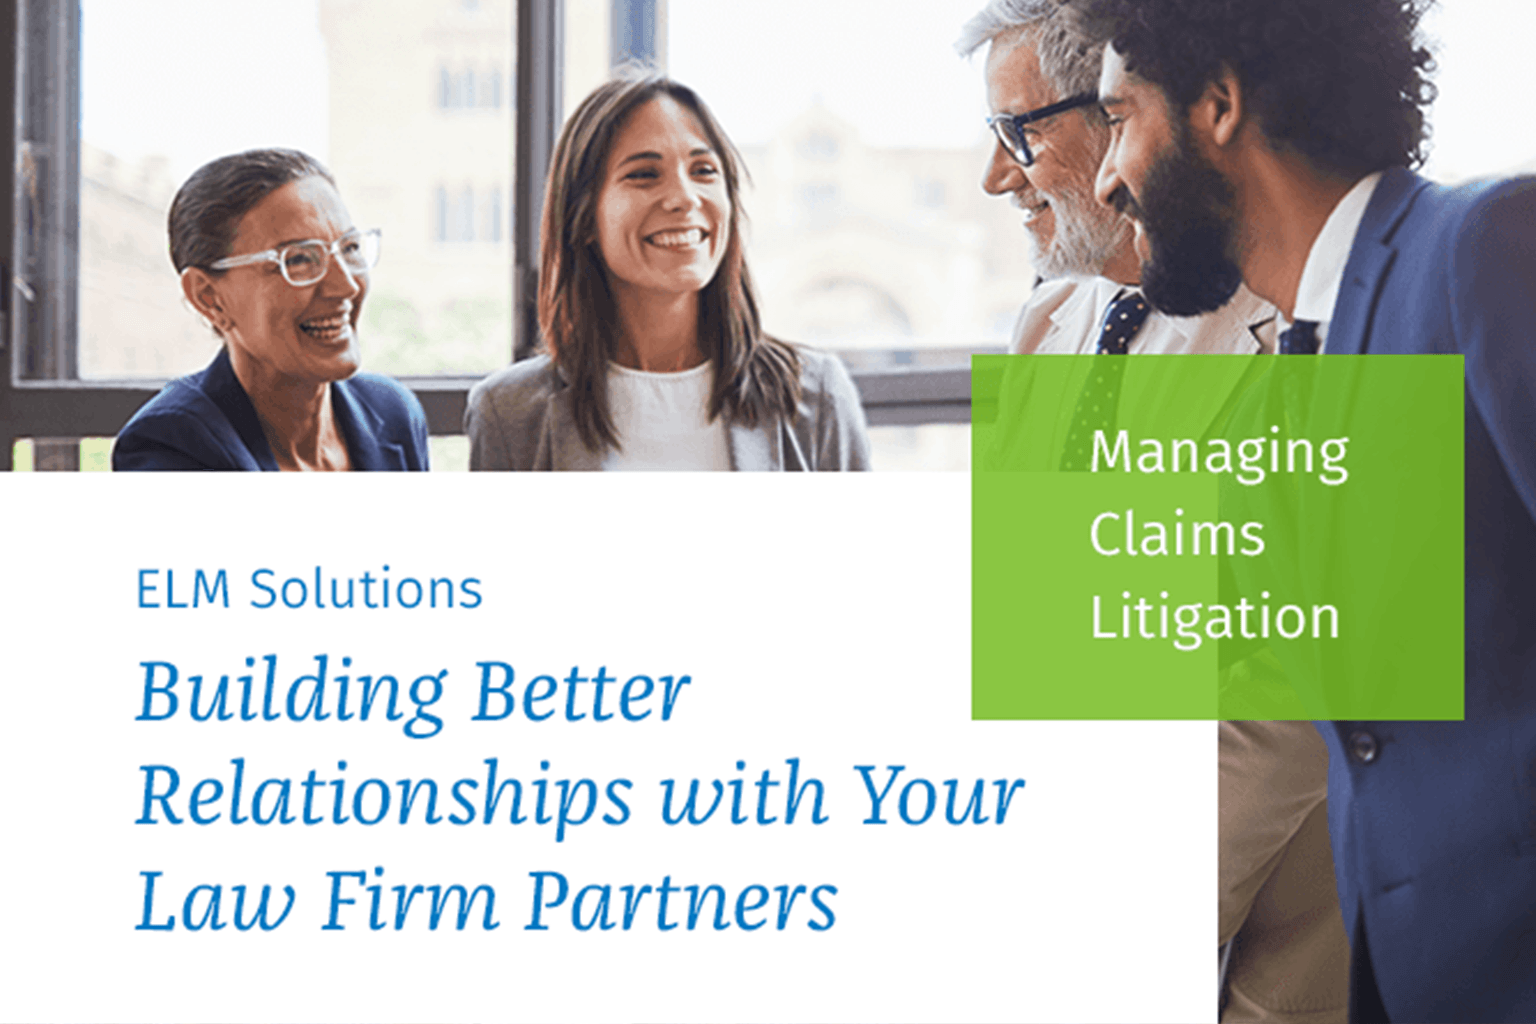 Whitepaper: Building Better Relationships with Your Law Firm Partners